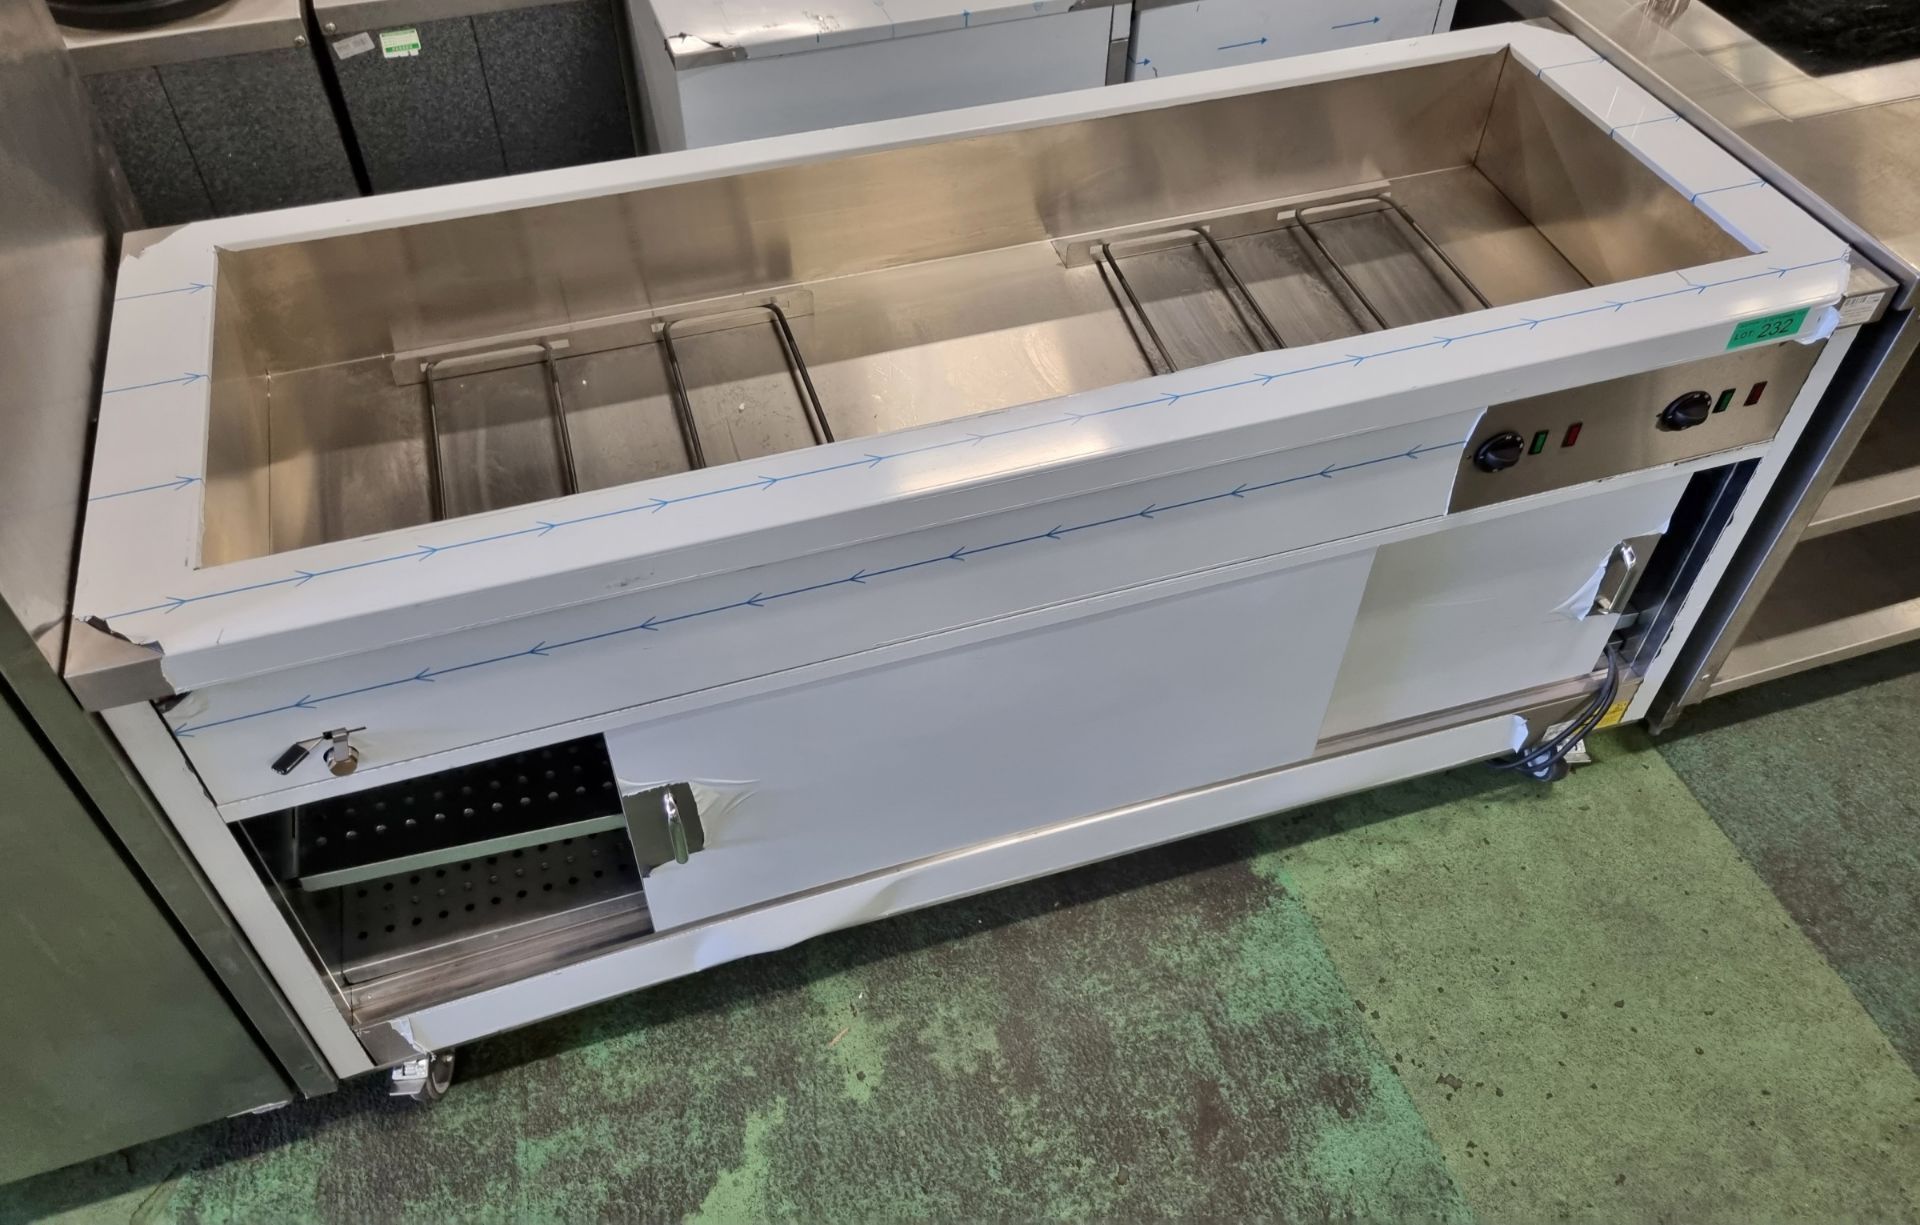 Parry HOT18BM hot cupboard with bain marie top - 180 x 65 x 90 - Image 4 of 6